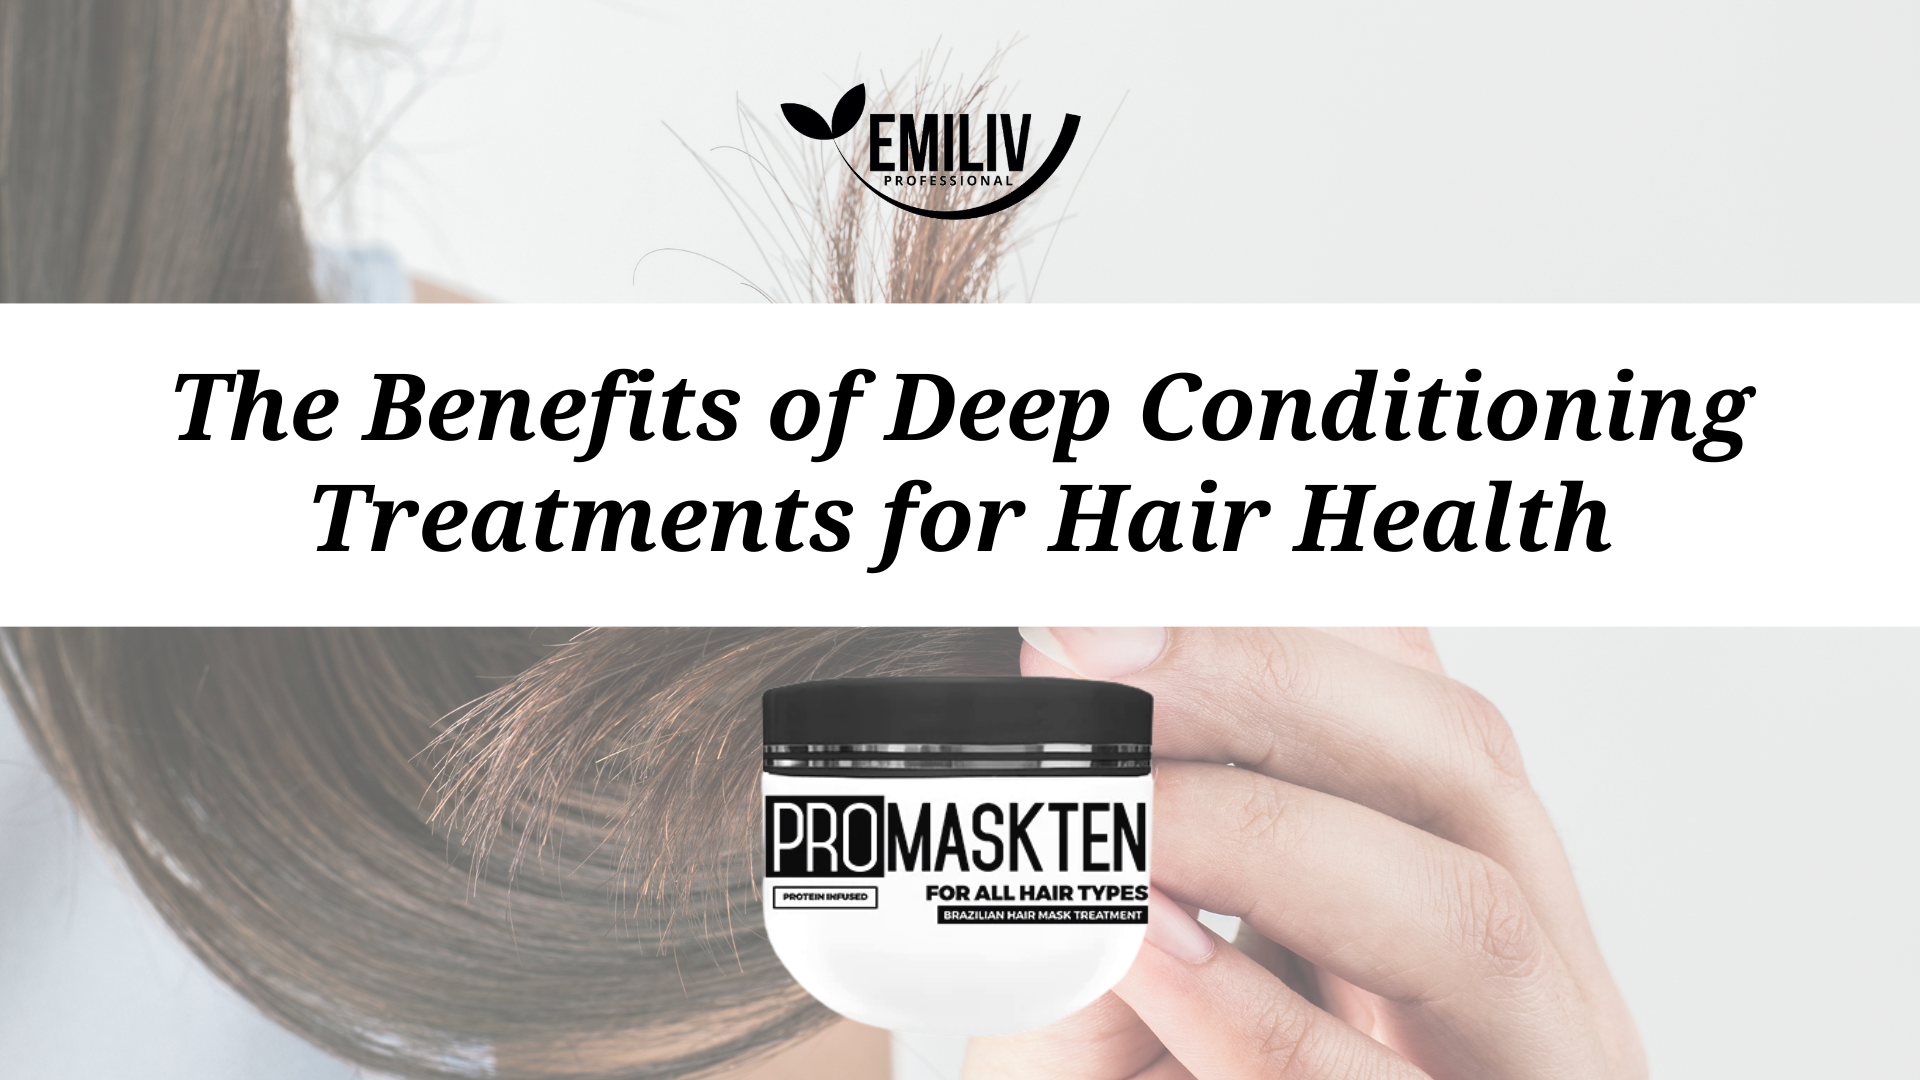 The Benefits of Deep Conditioning Treatments for Hair Health